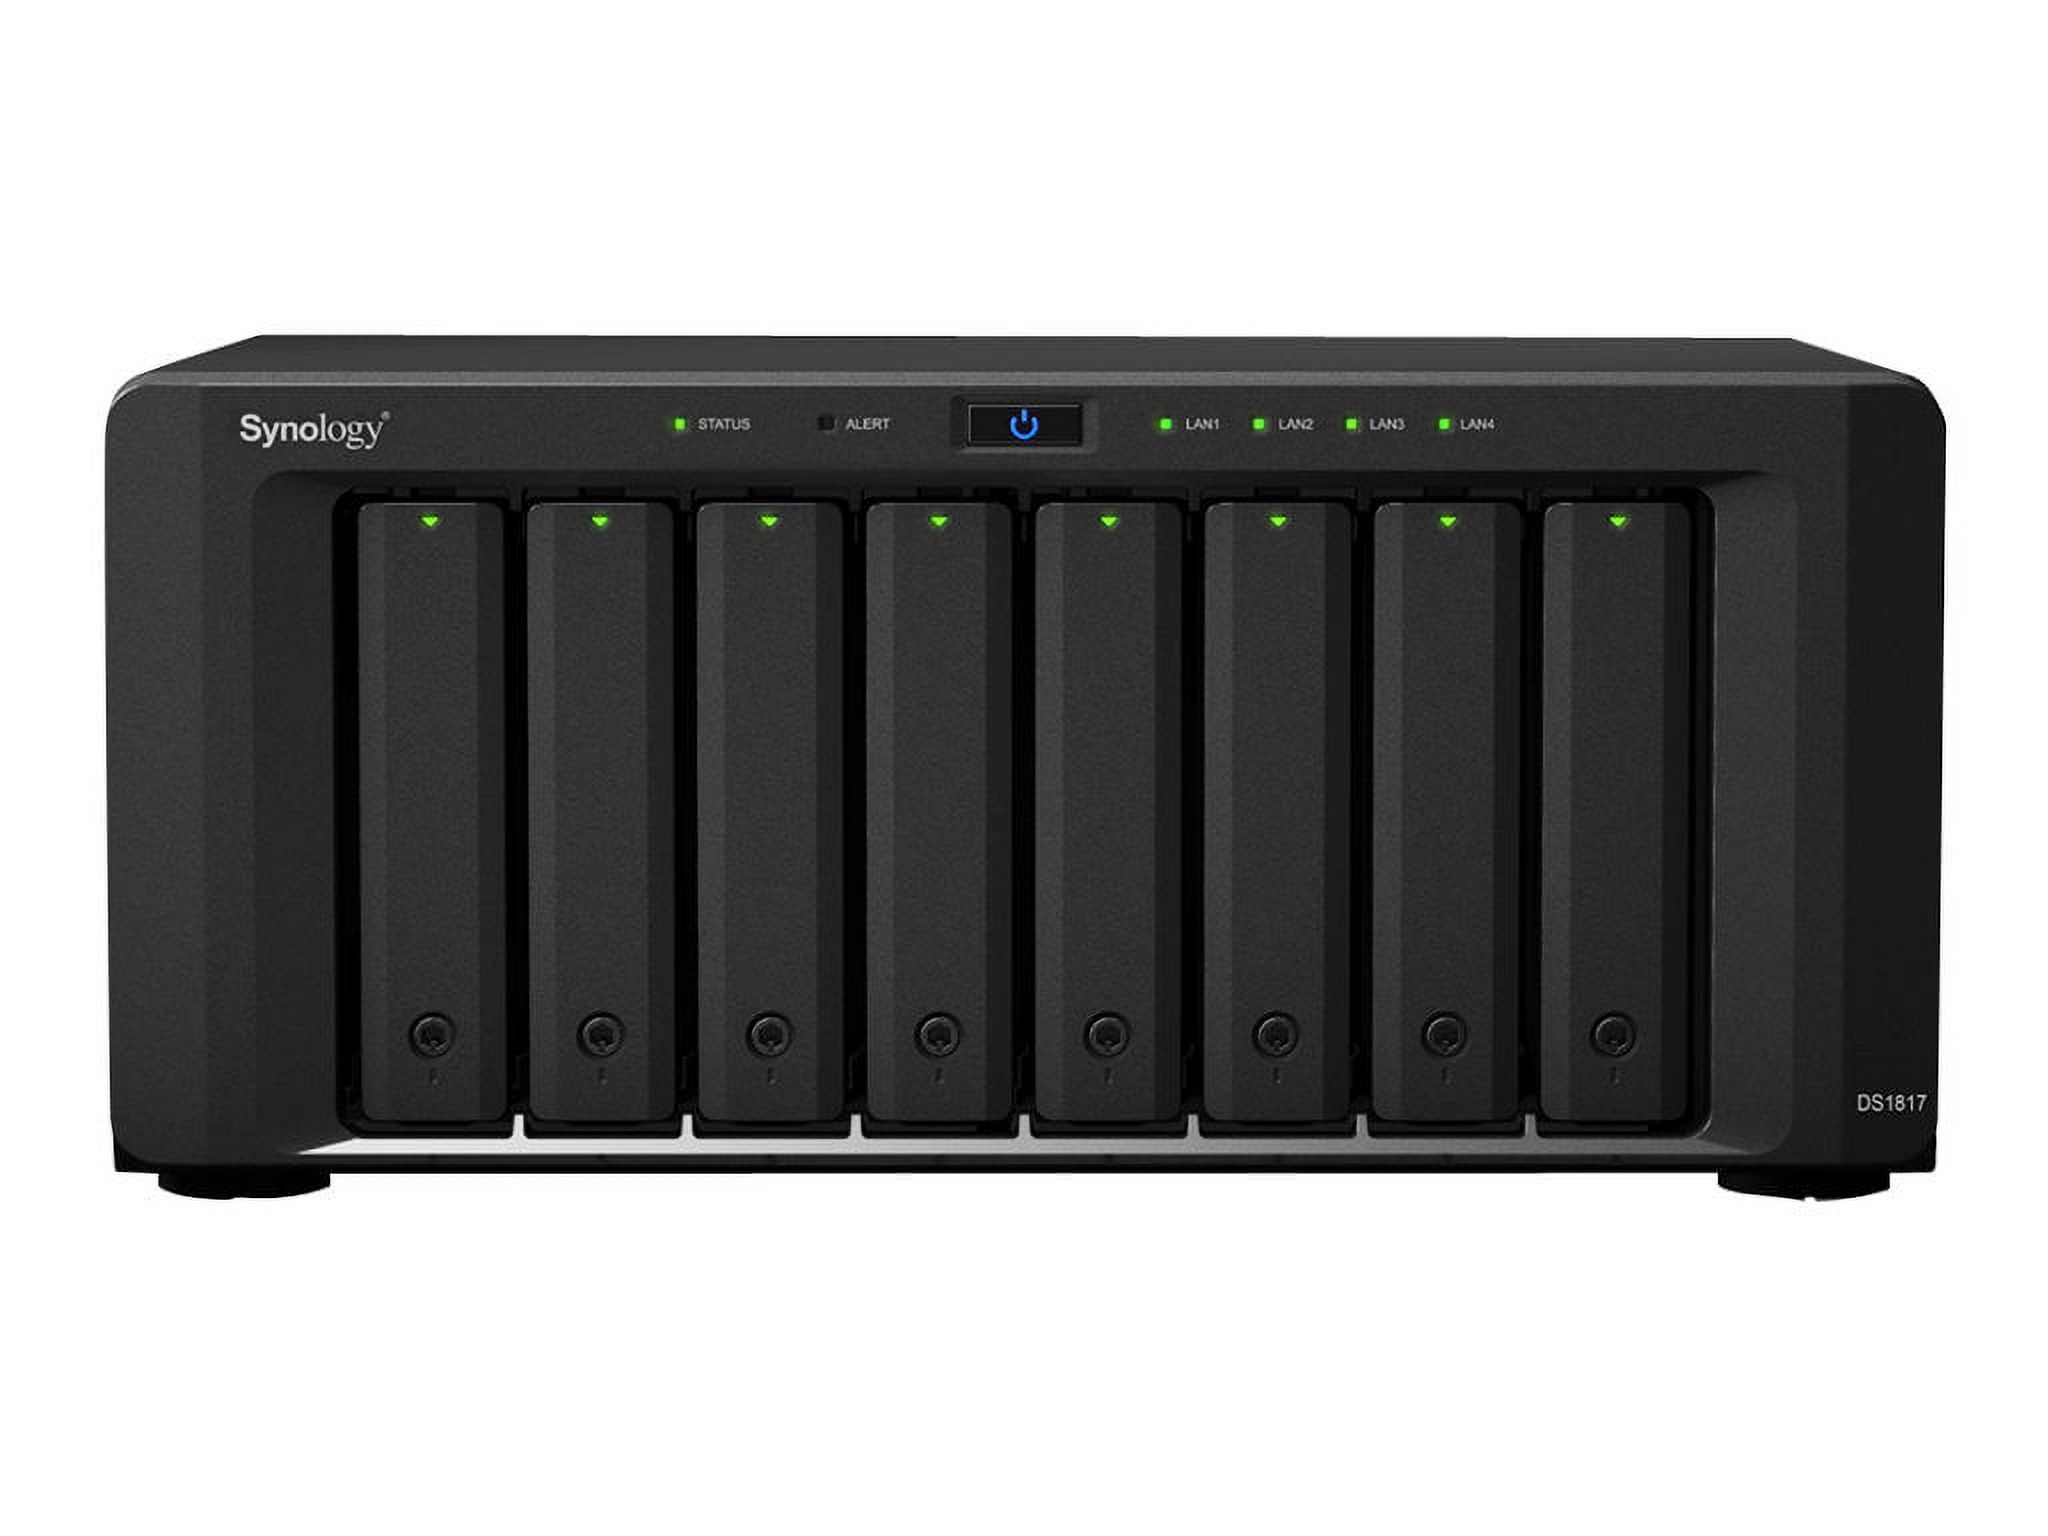 Synology Network Attachment Storage DS1517+(2GB) 5bay 2GB DiskStation DS1517 - image 2 of 6